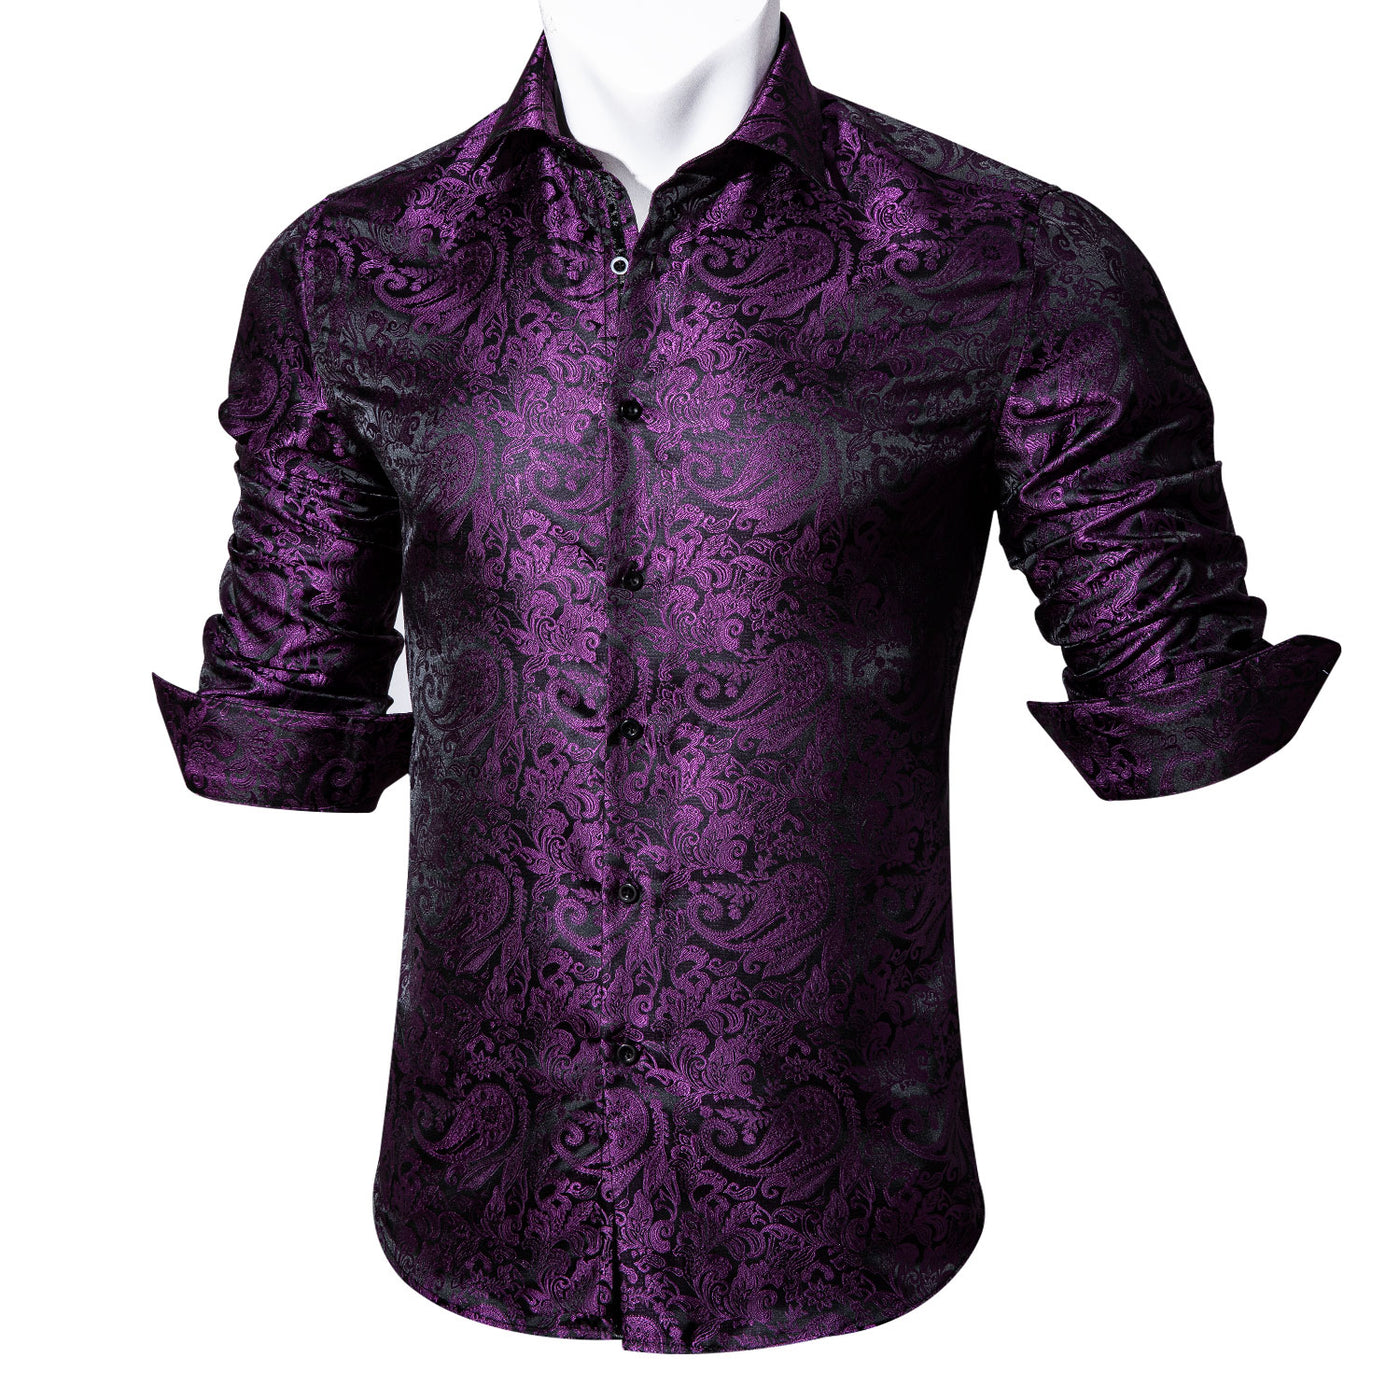 Barry Wang Quality Menswear Seller Free Shipping World Wide